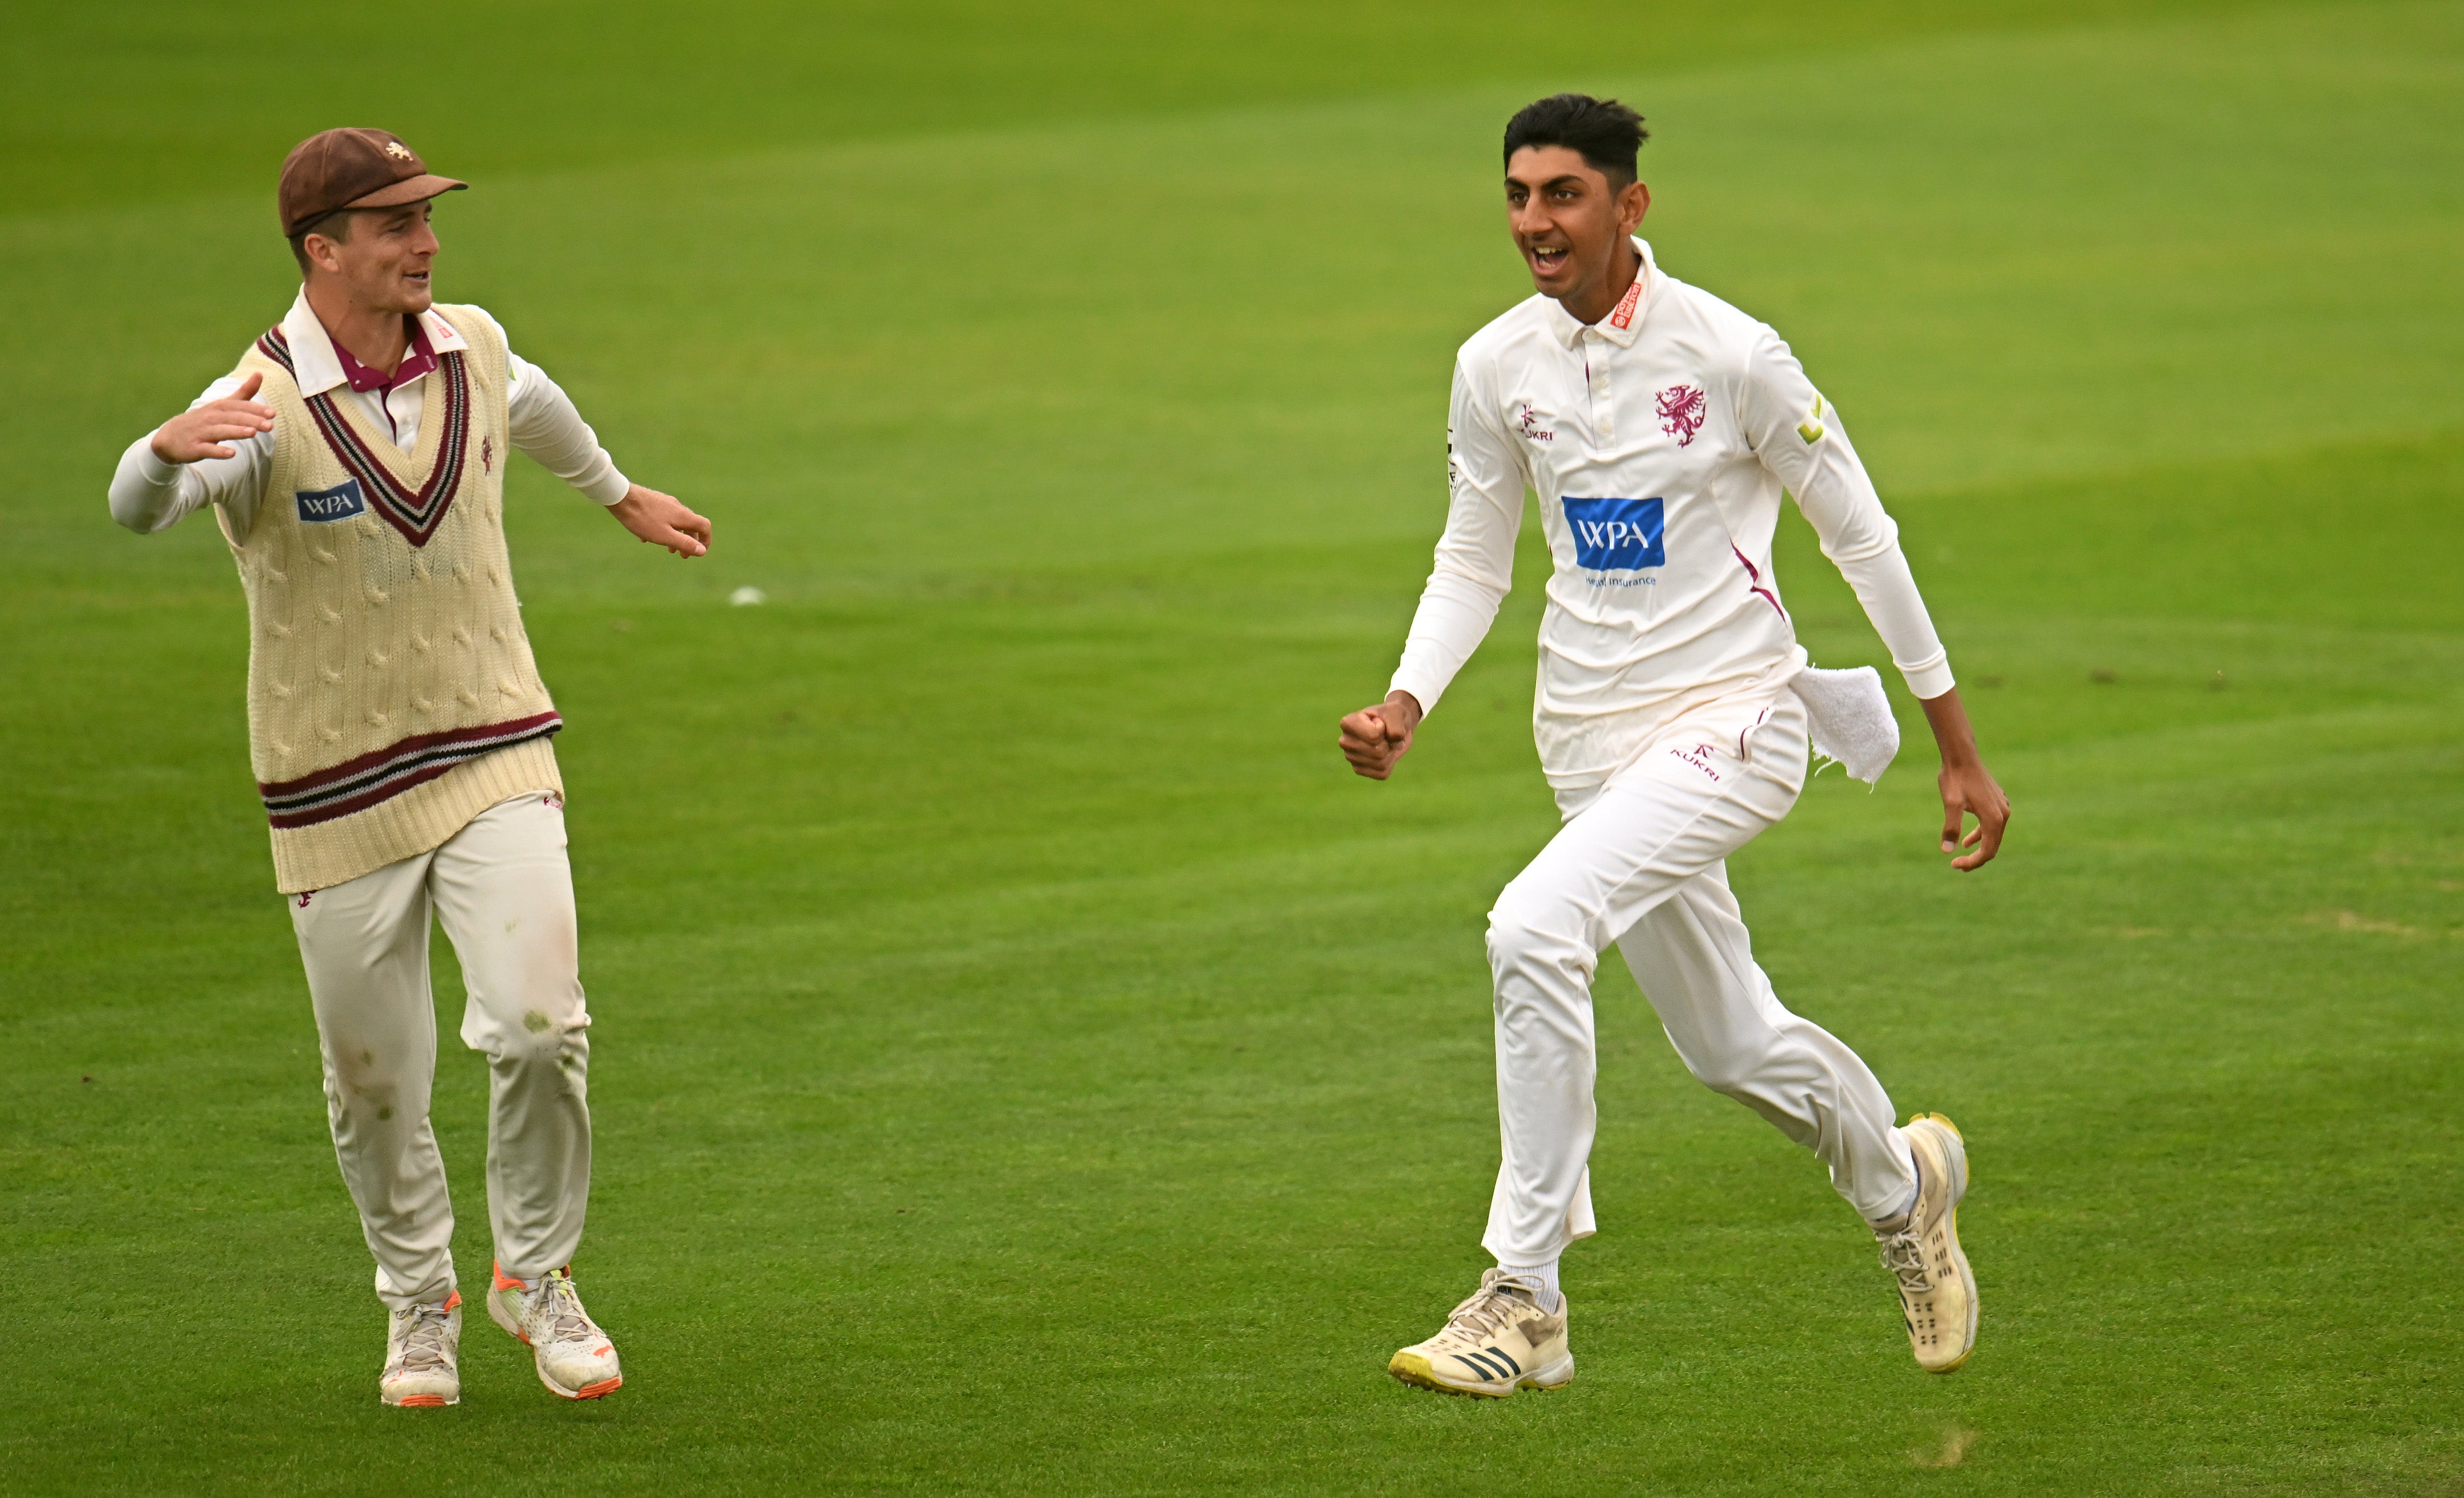 Shoaib Bashir has only played six first-class matches for Somerset